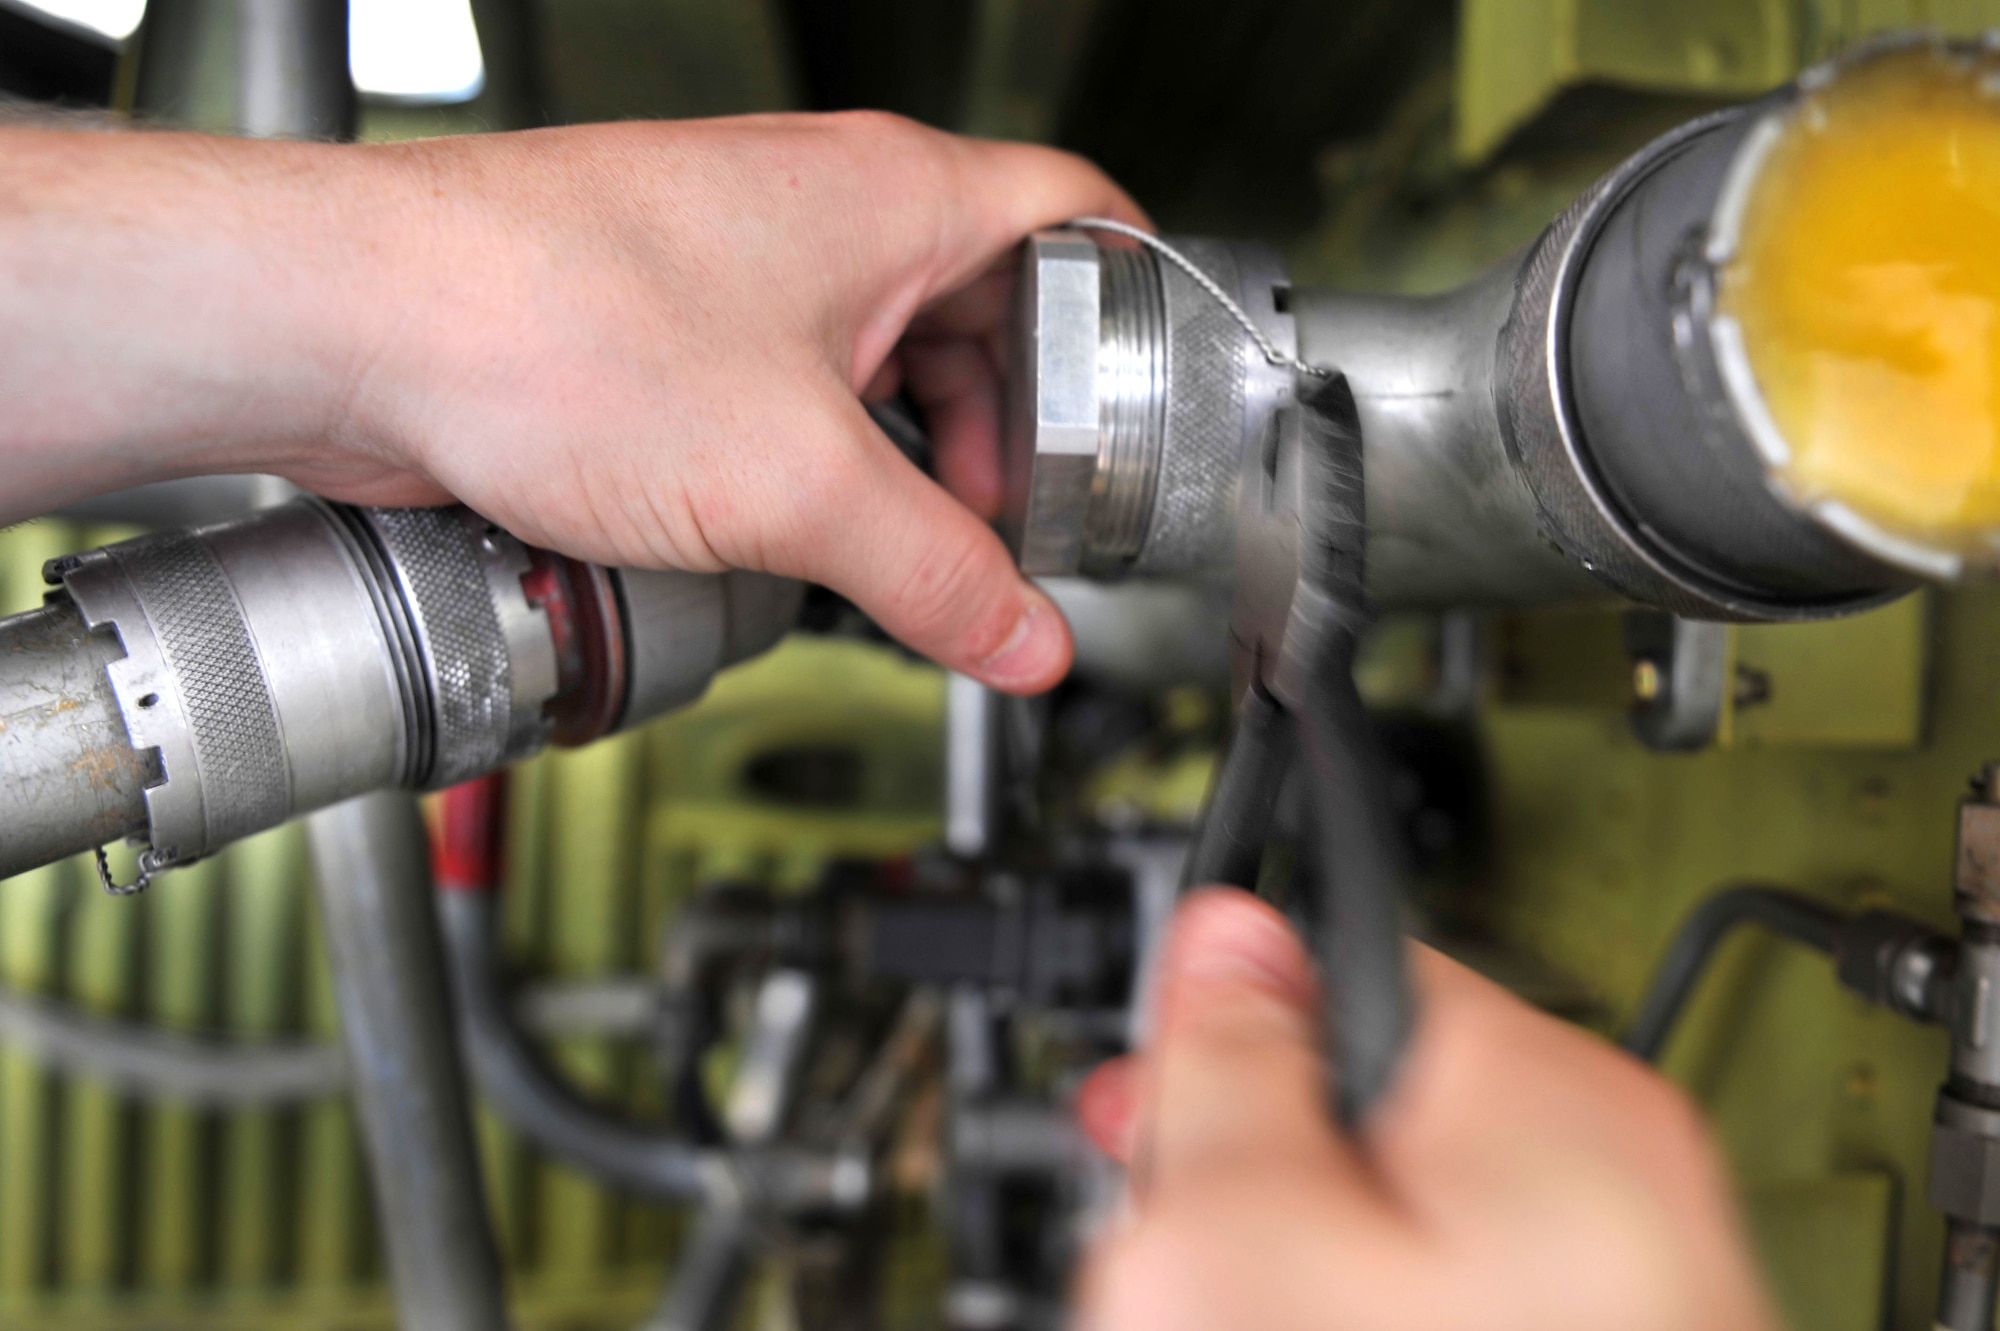 A fuel pipe is repaired by a 19th Component Maintenance Squadron Airman July 16 on a C-130 aircraft training wing. (U.S. Air Force photo by Senior Airman Steele C. G. Britton)